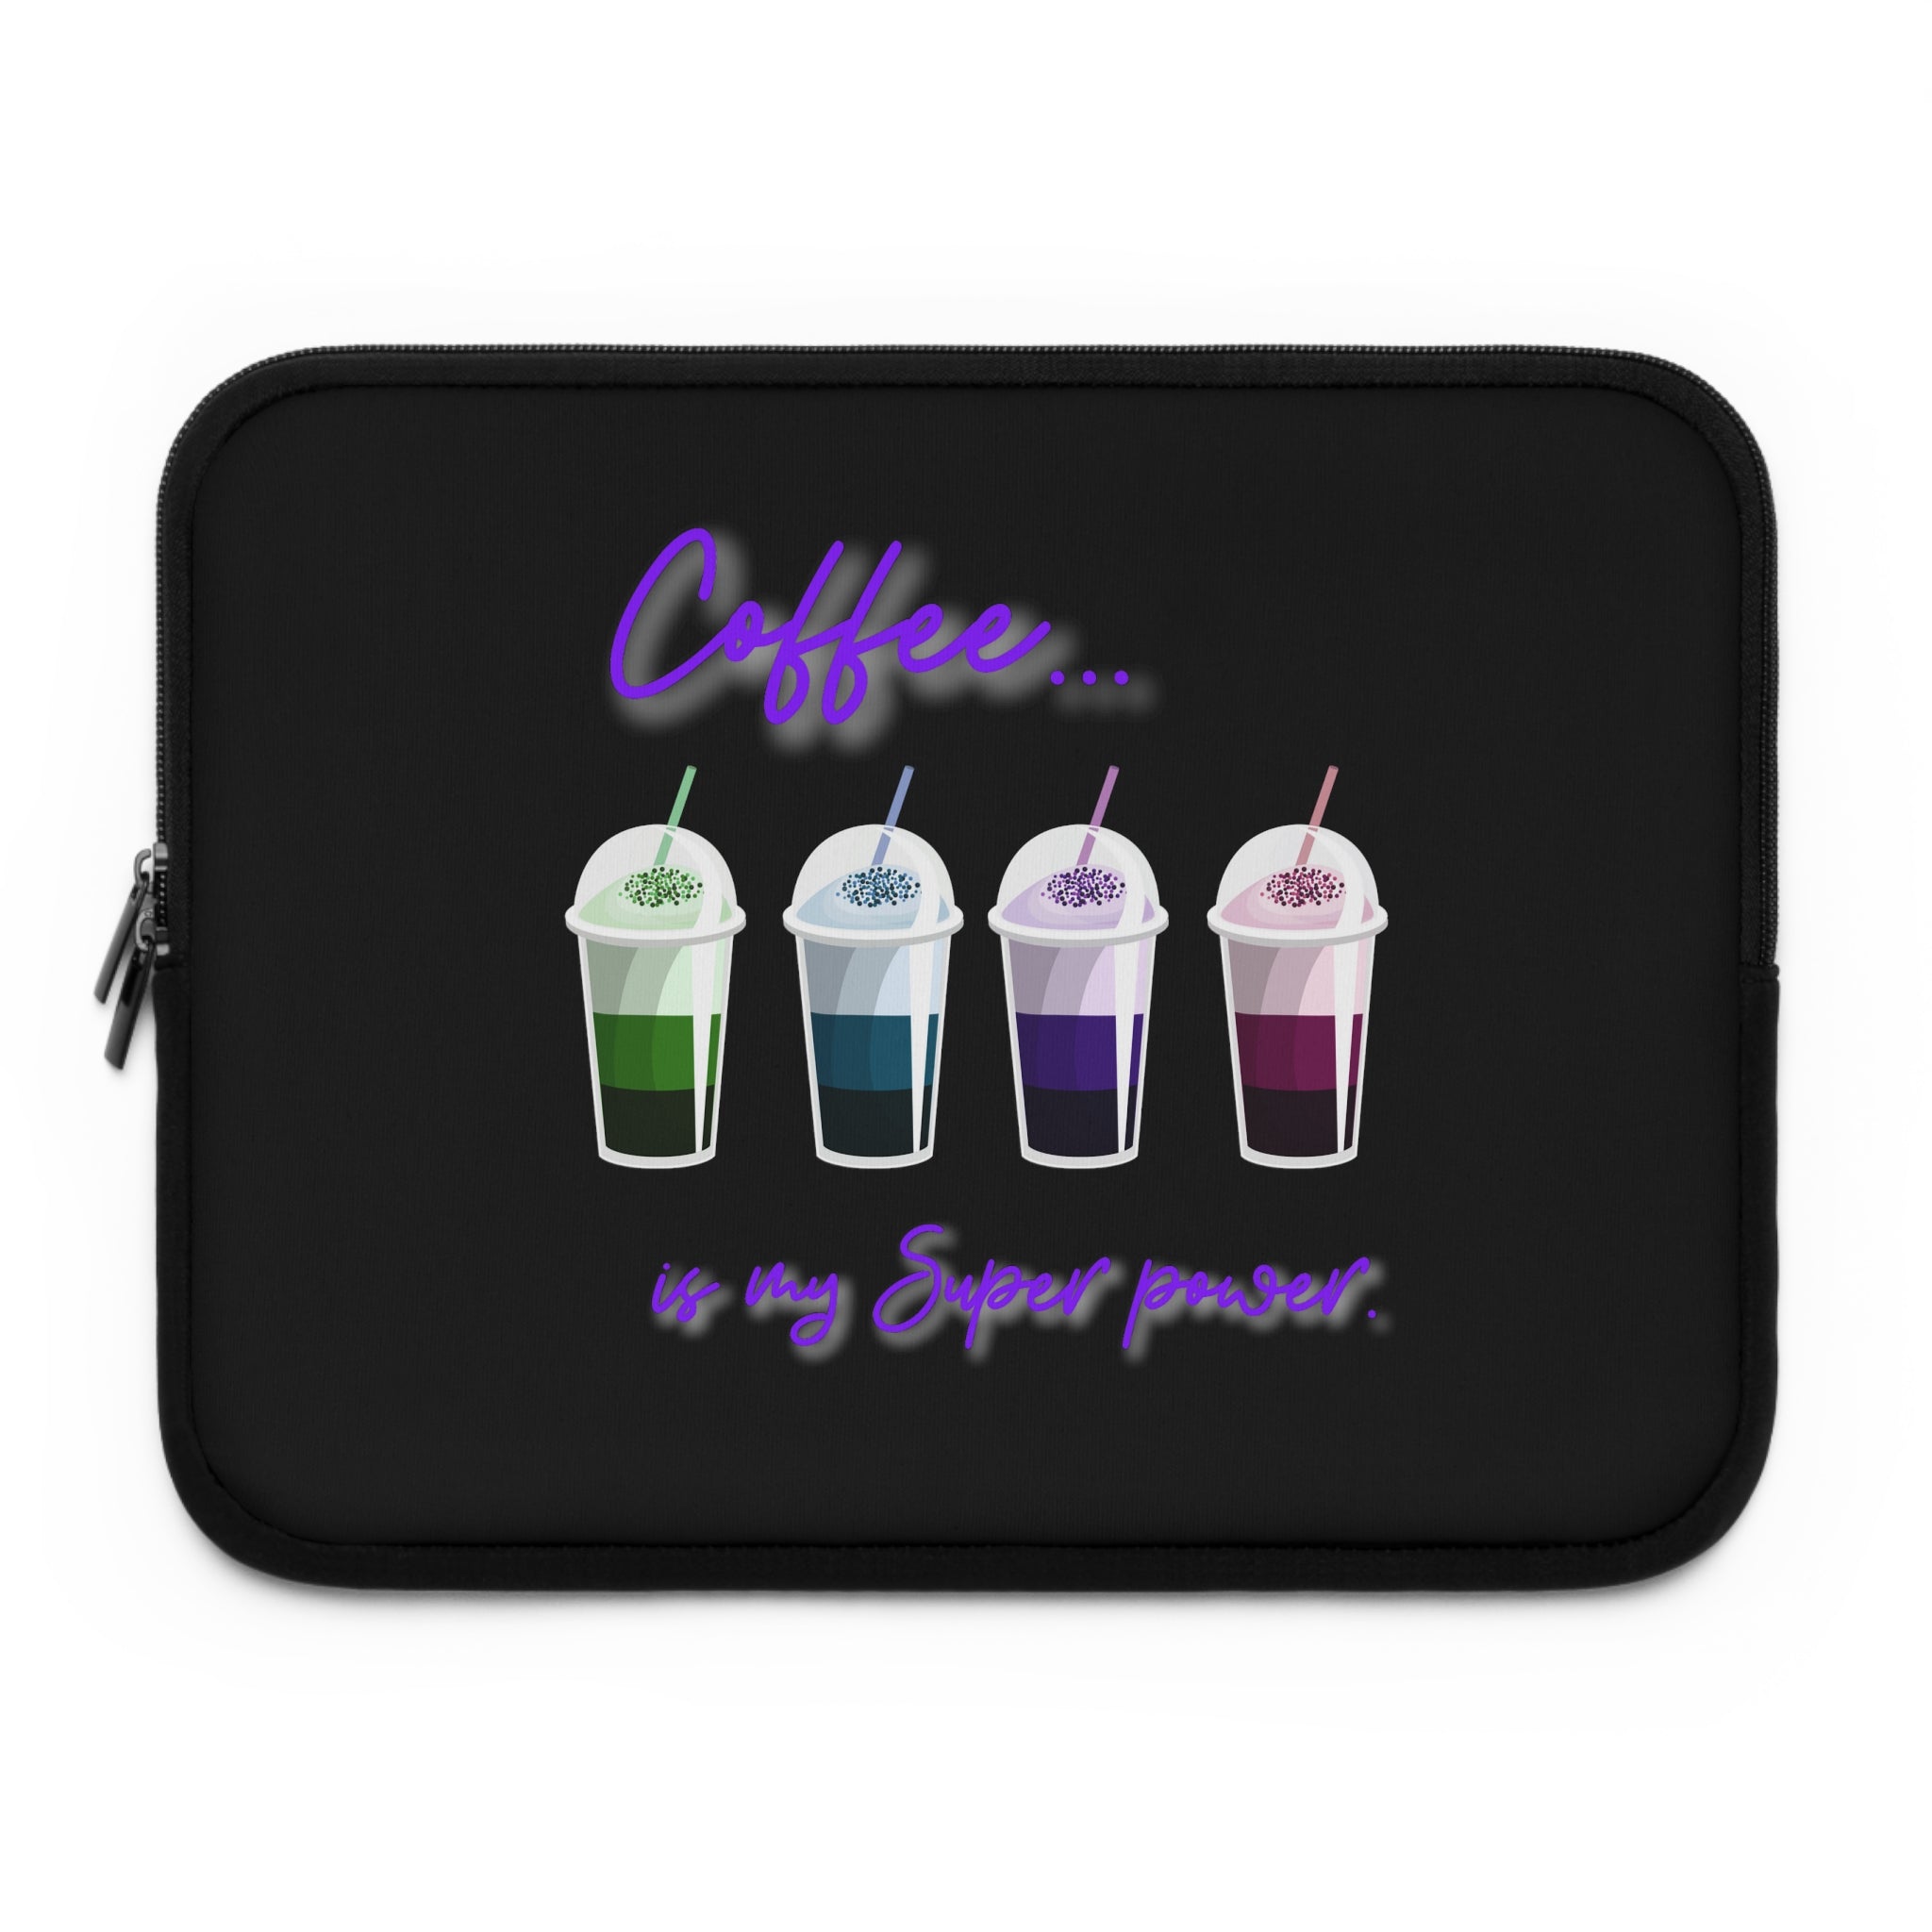 Coffee is my Super power, size 13 Laptop Sleeve